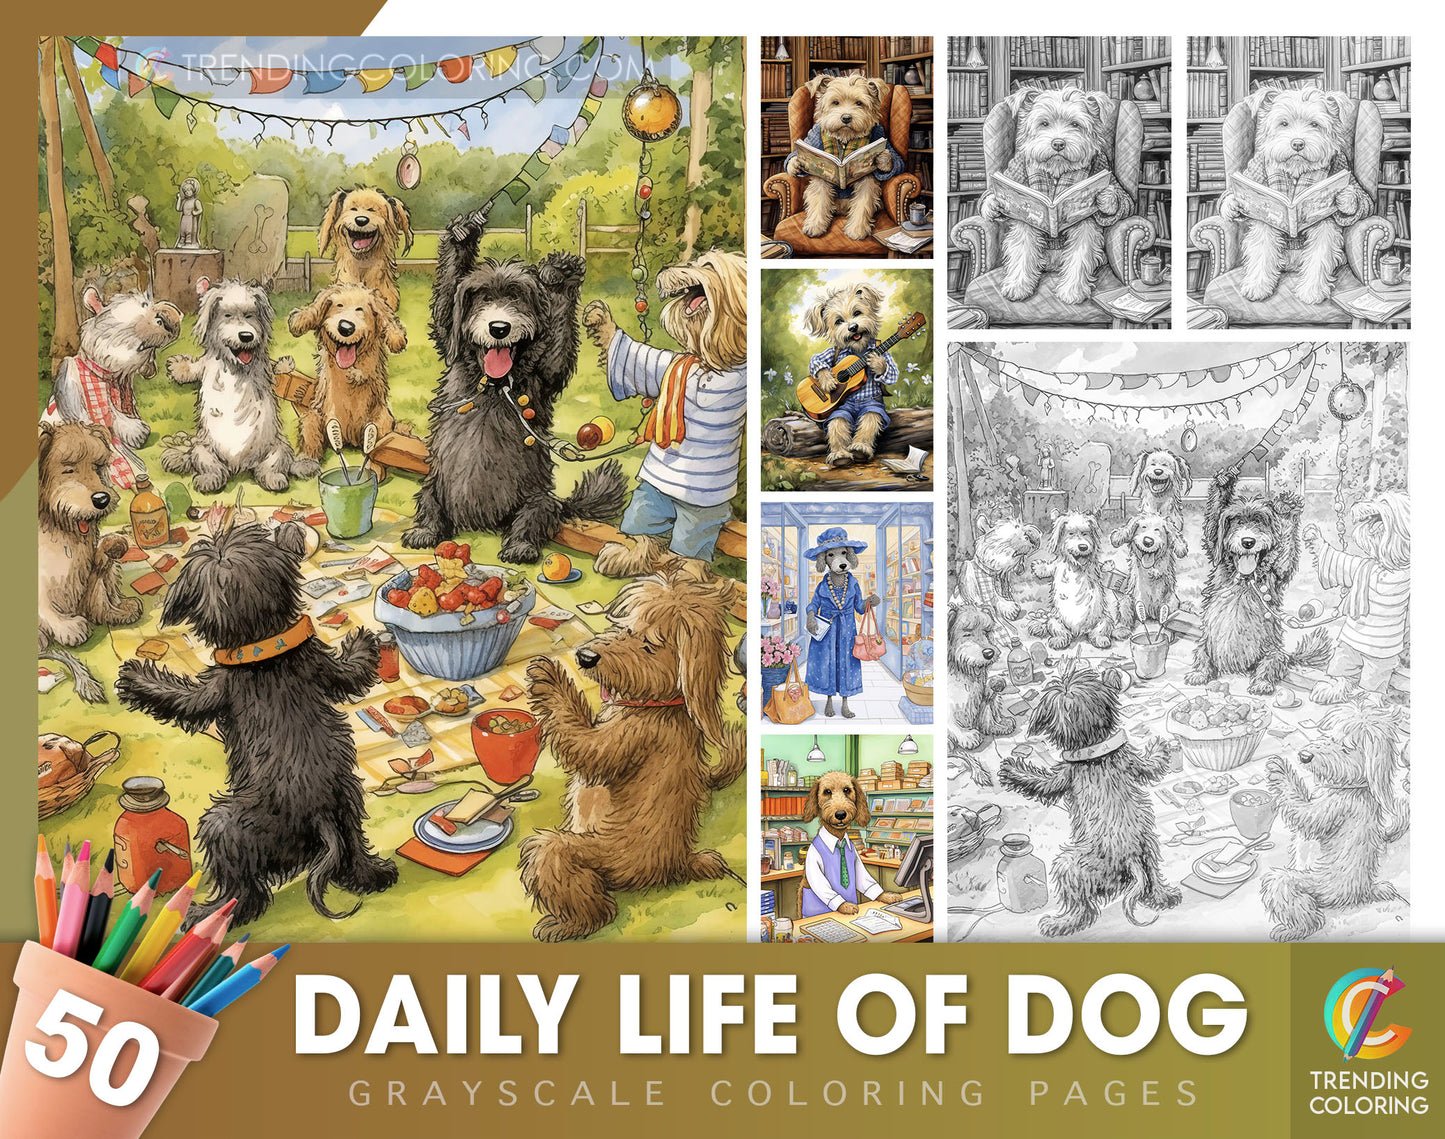 50 Daily Life Of Dog Grayscale Coloring Page - Instant Download - Printable Dark/Light